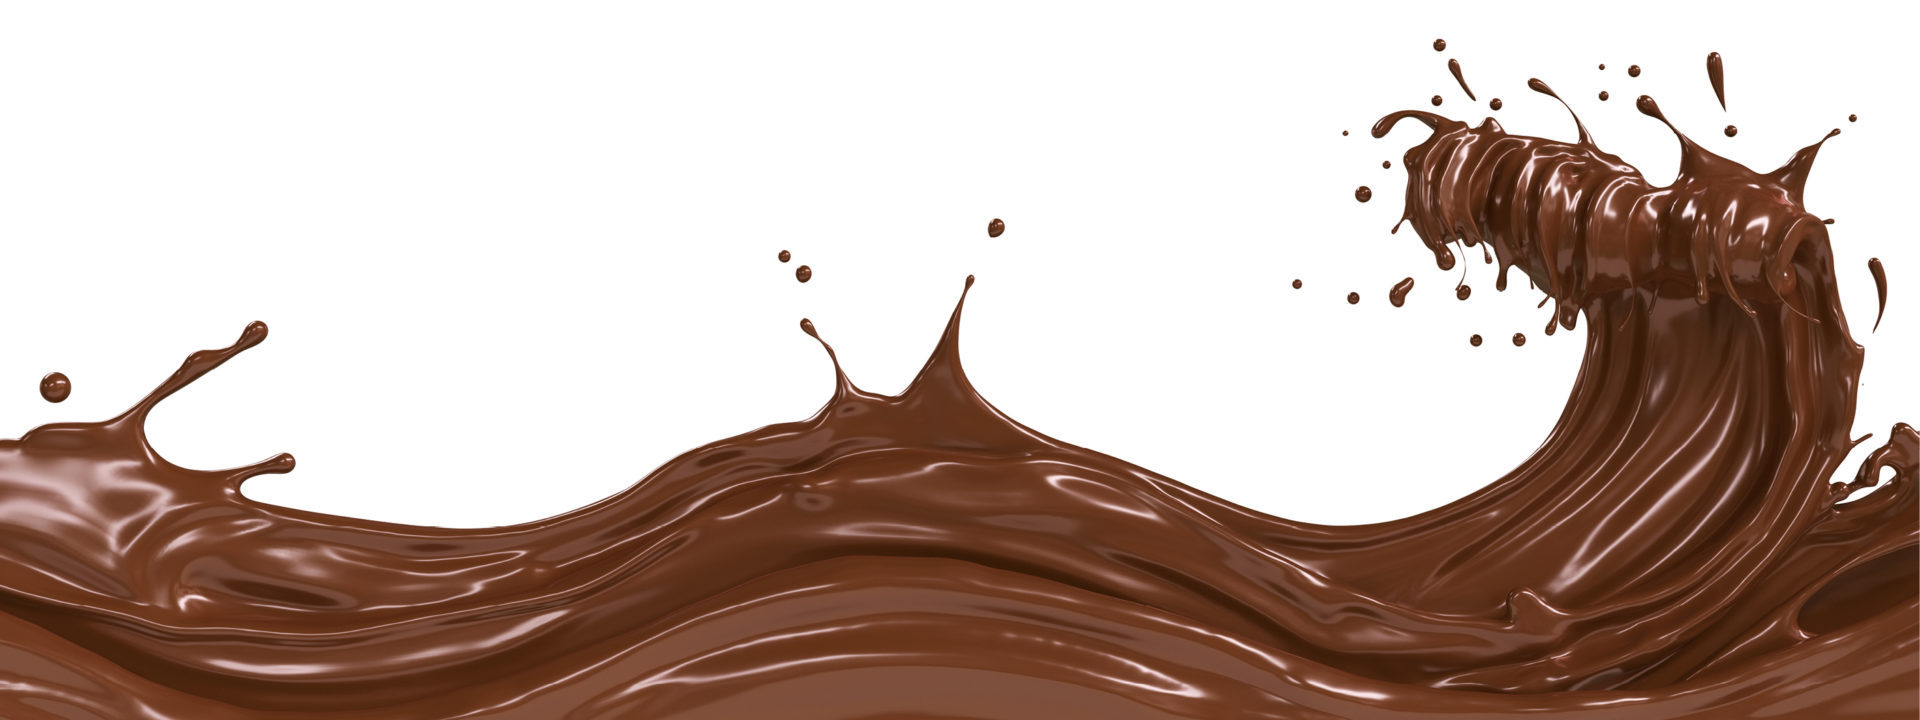 Waves of milk chocolate on white background